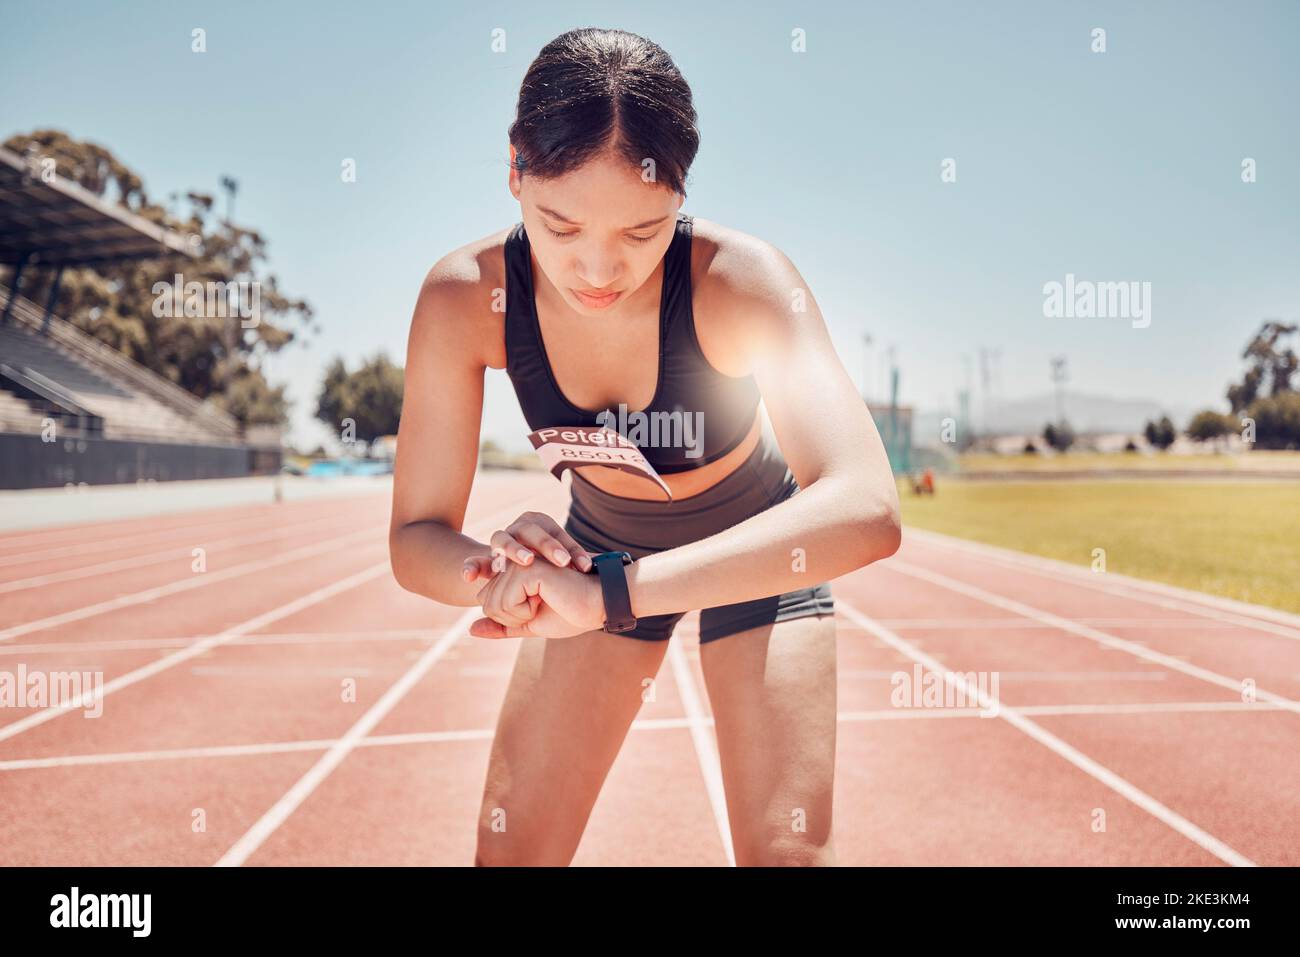 Smartwatch, sports and woman check time, workout goal or progress during training, running or exercise at stadium in summer. Runner, athlete or Stock Photo